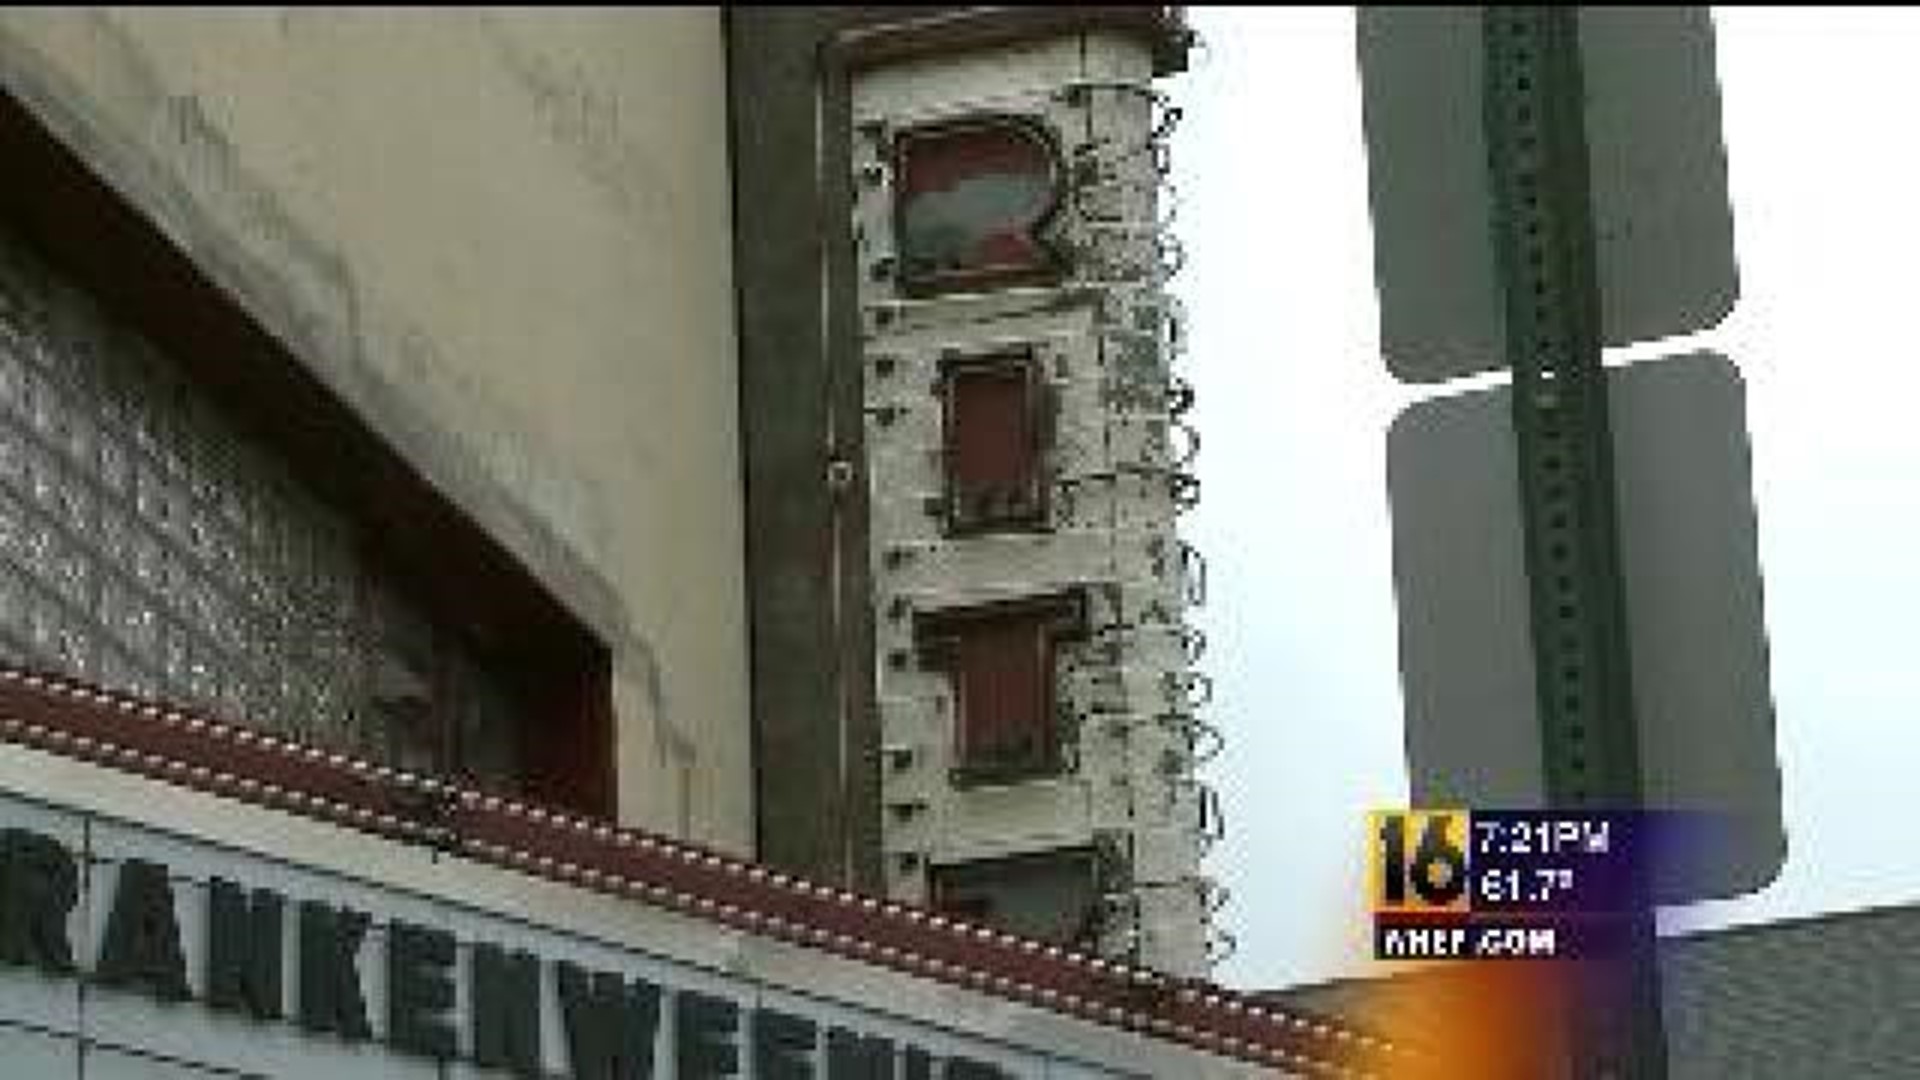 Movie Theater in Danger of Closing